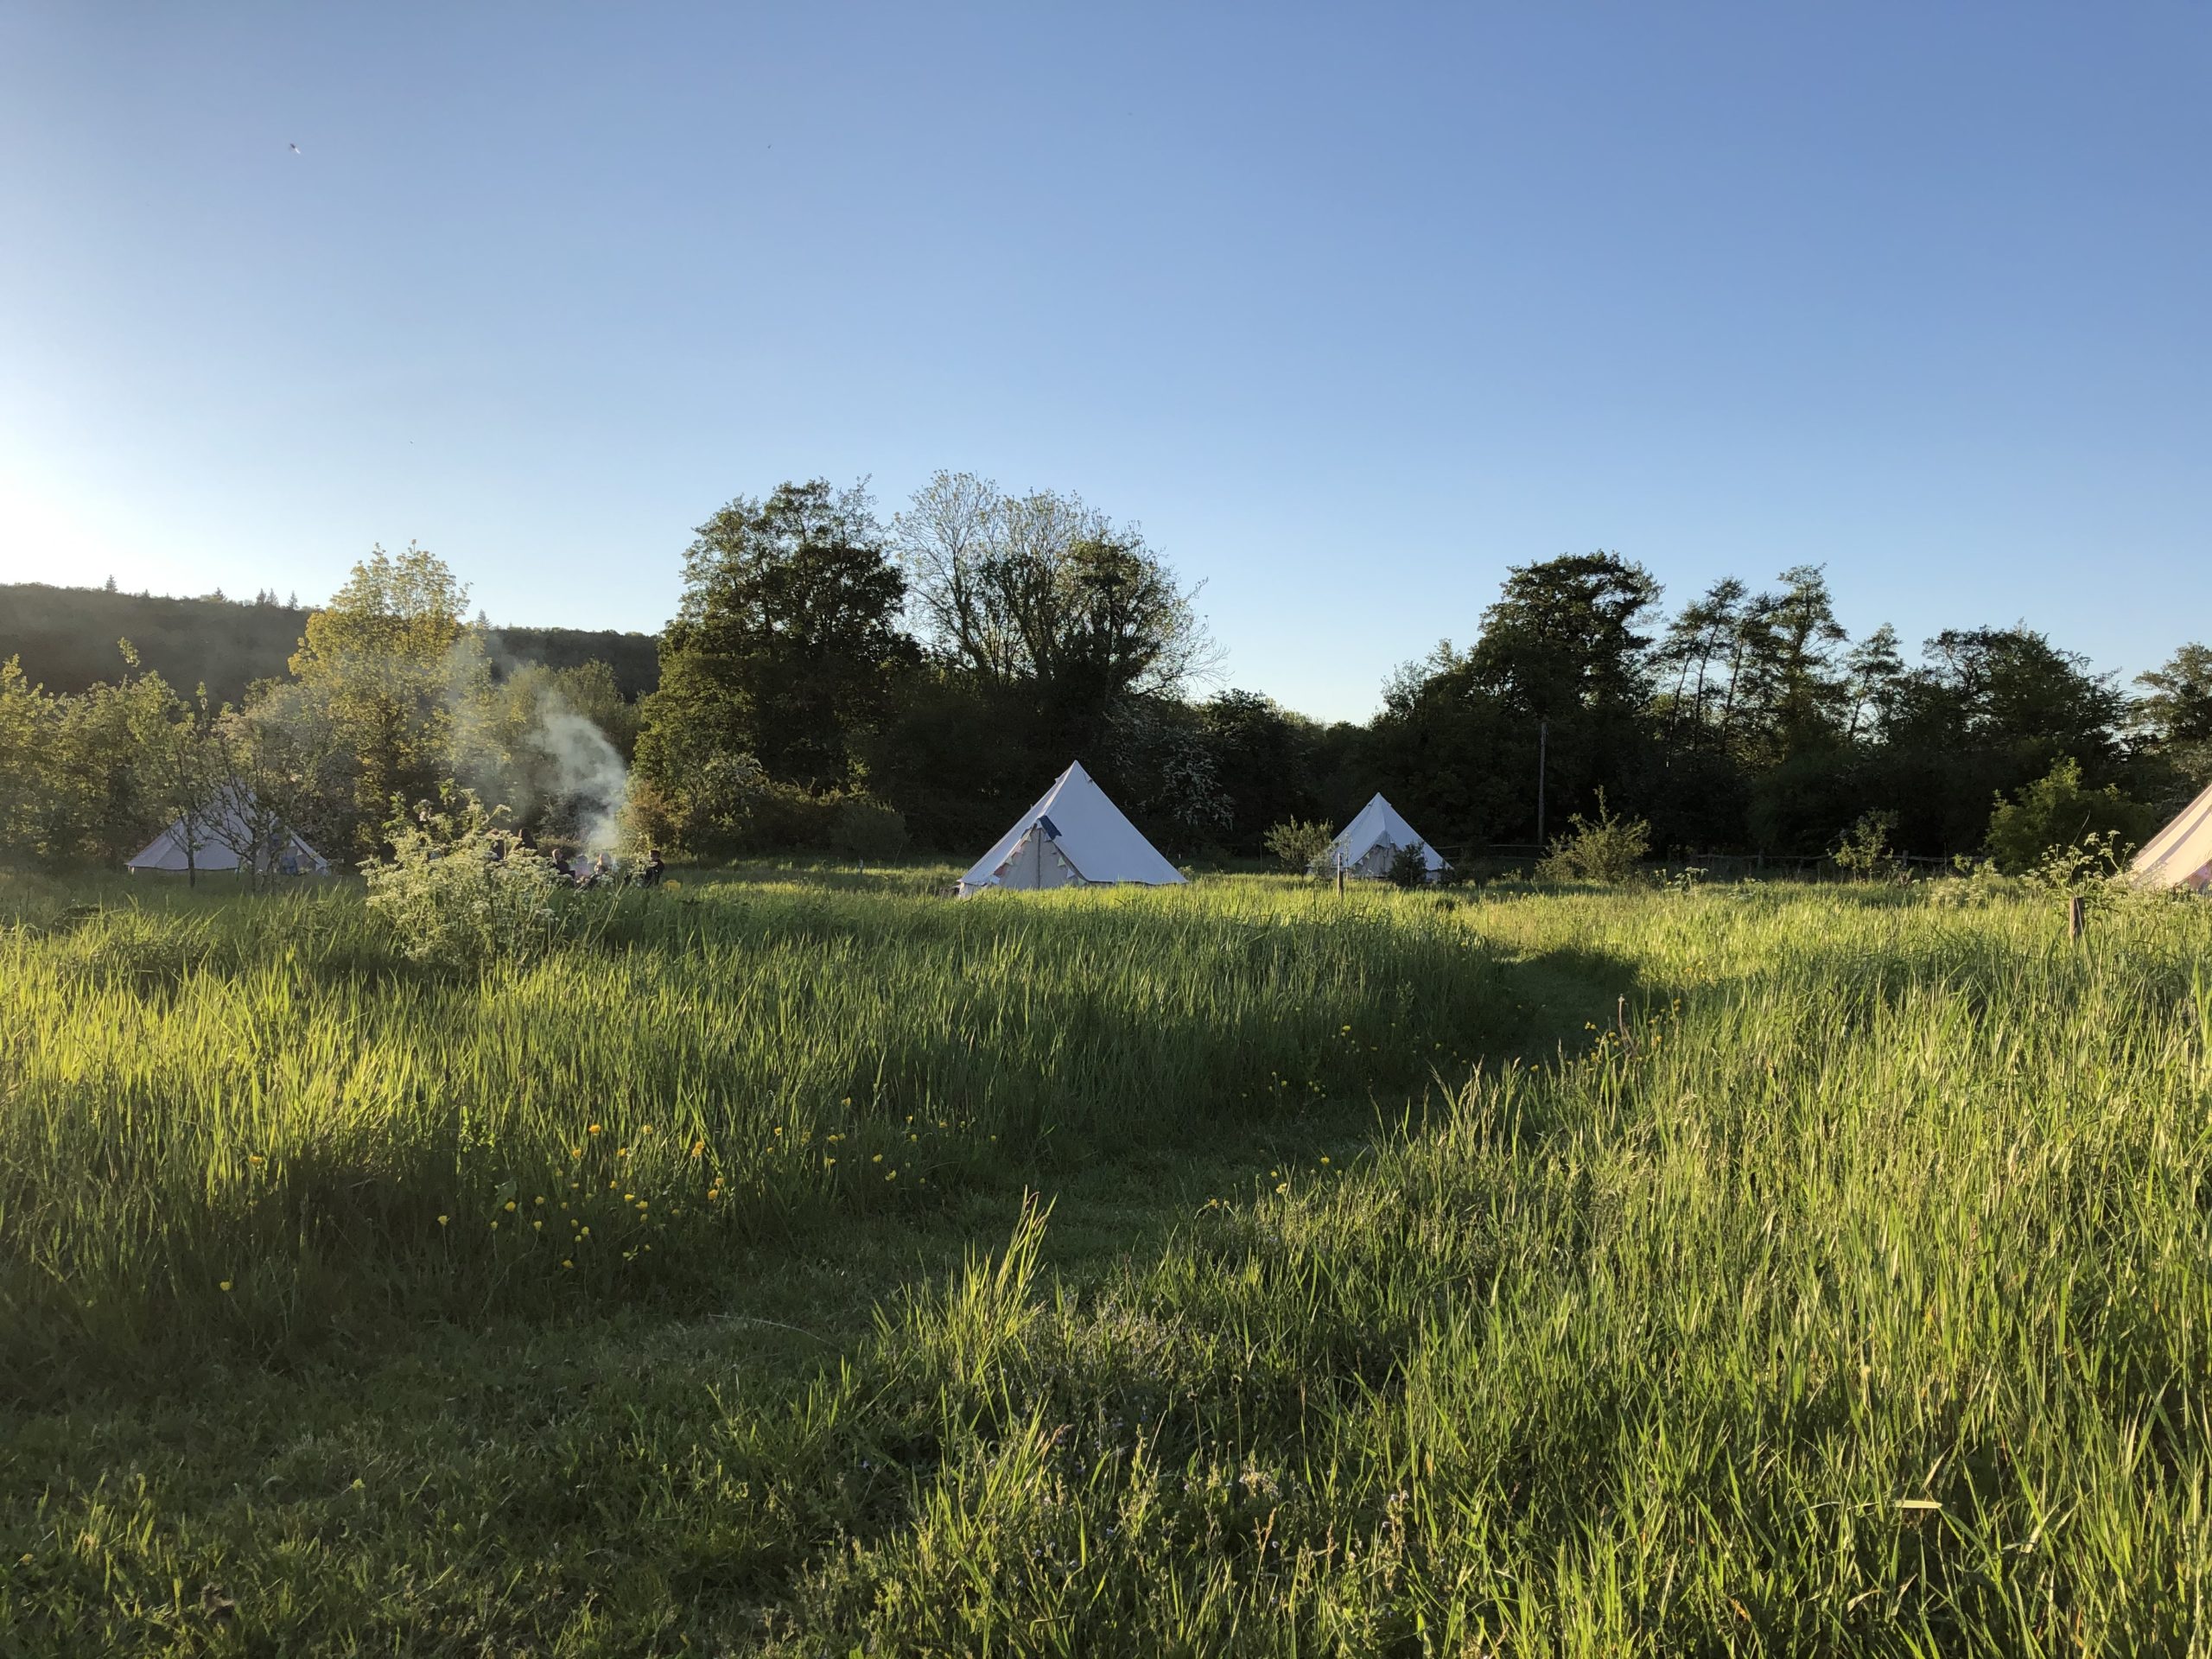 Three white tents in field with green grass underneath and blue sky above